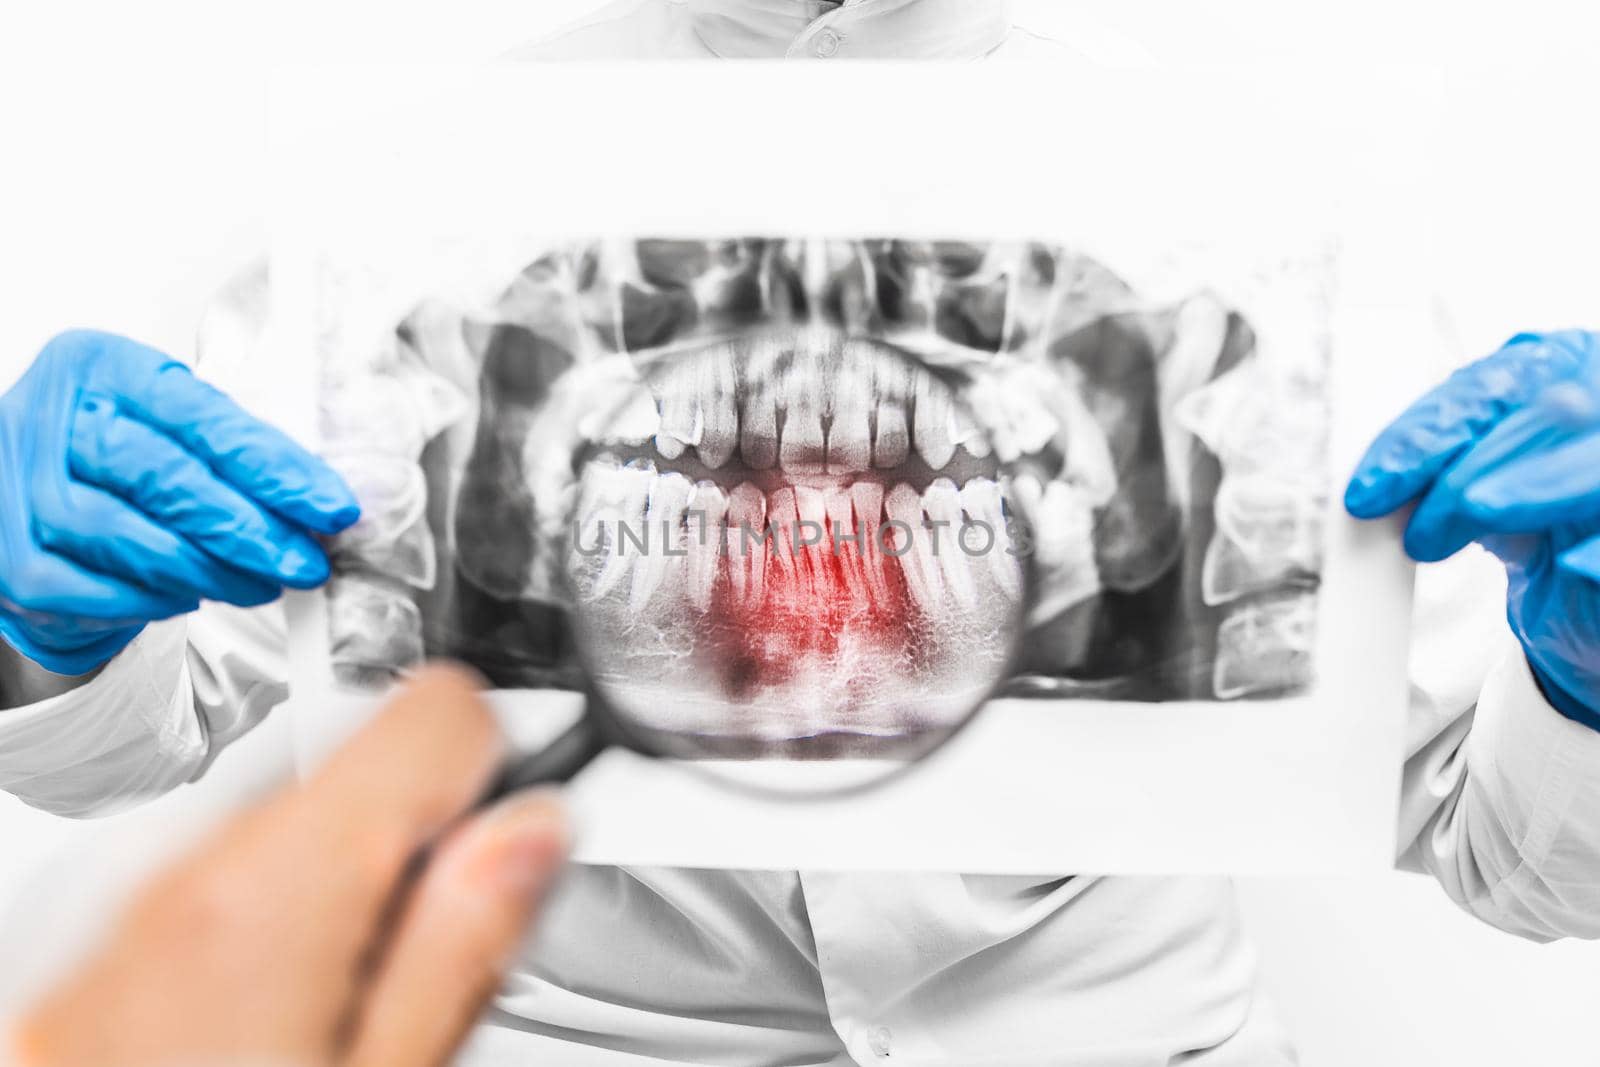 The dentist's hands in blue latex medical gloves hold a x-ray shot of the mouth and examine it using a magnifying glass, close-up by AYDO8